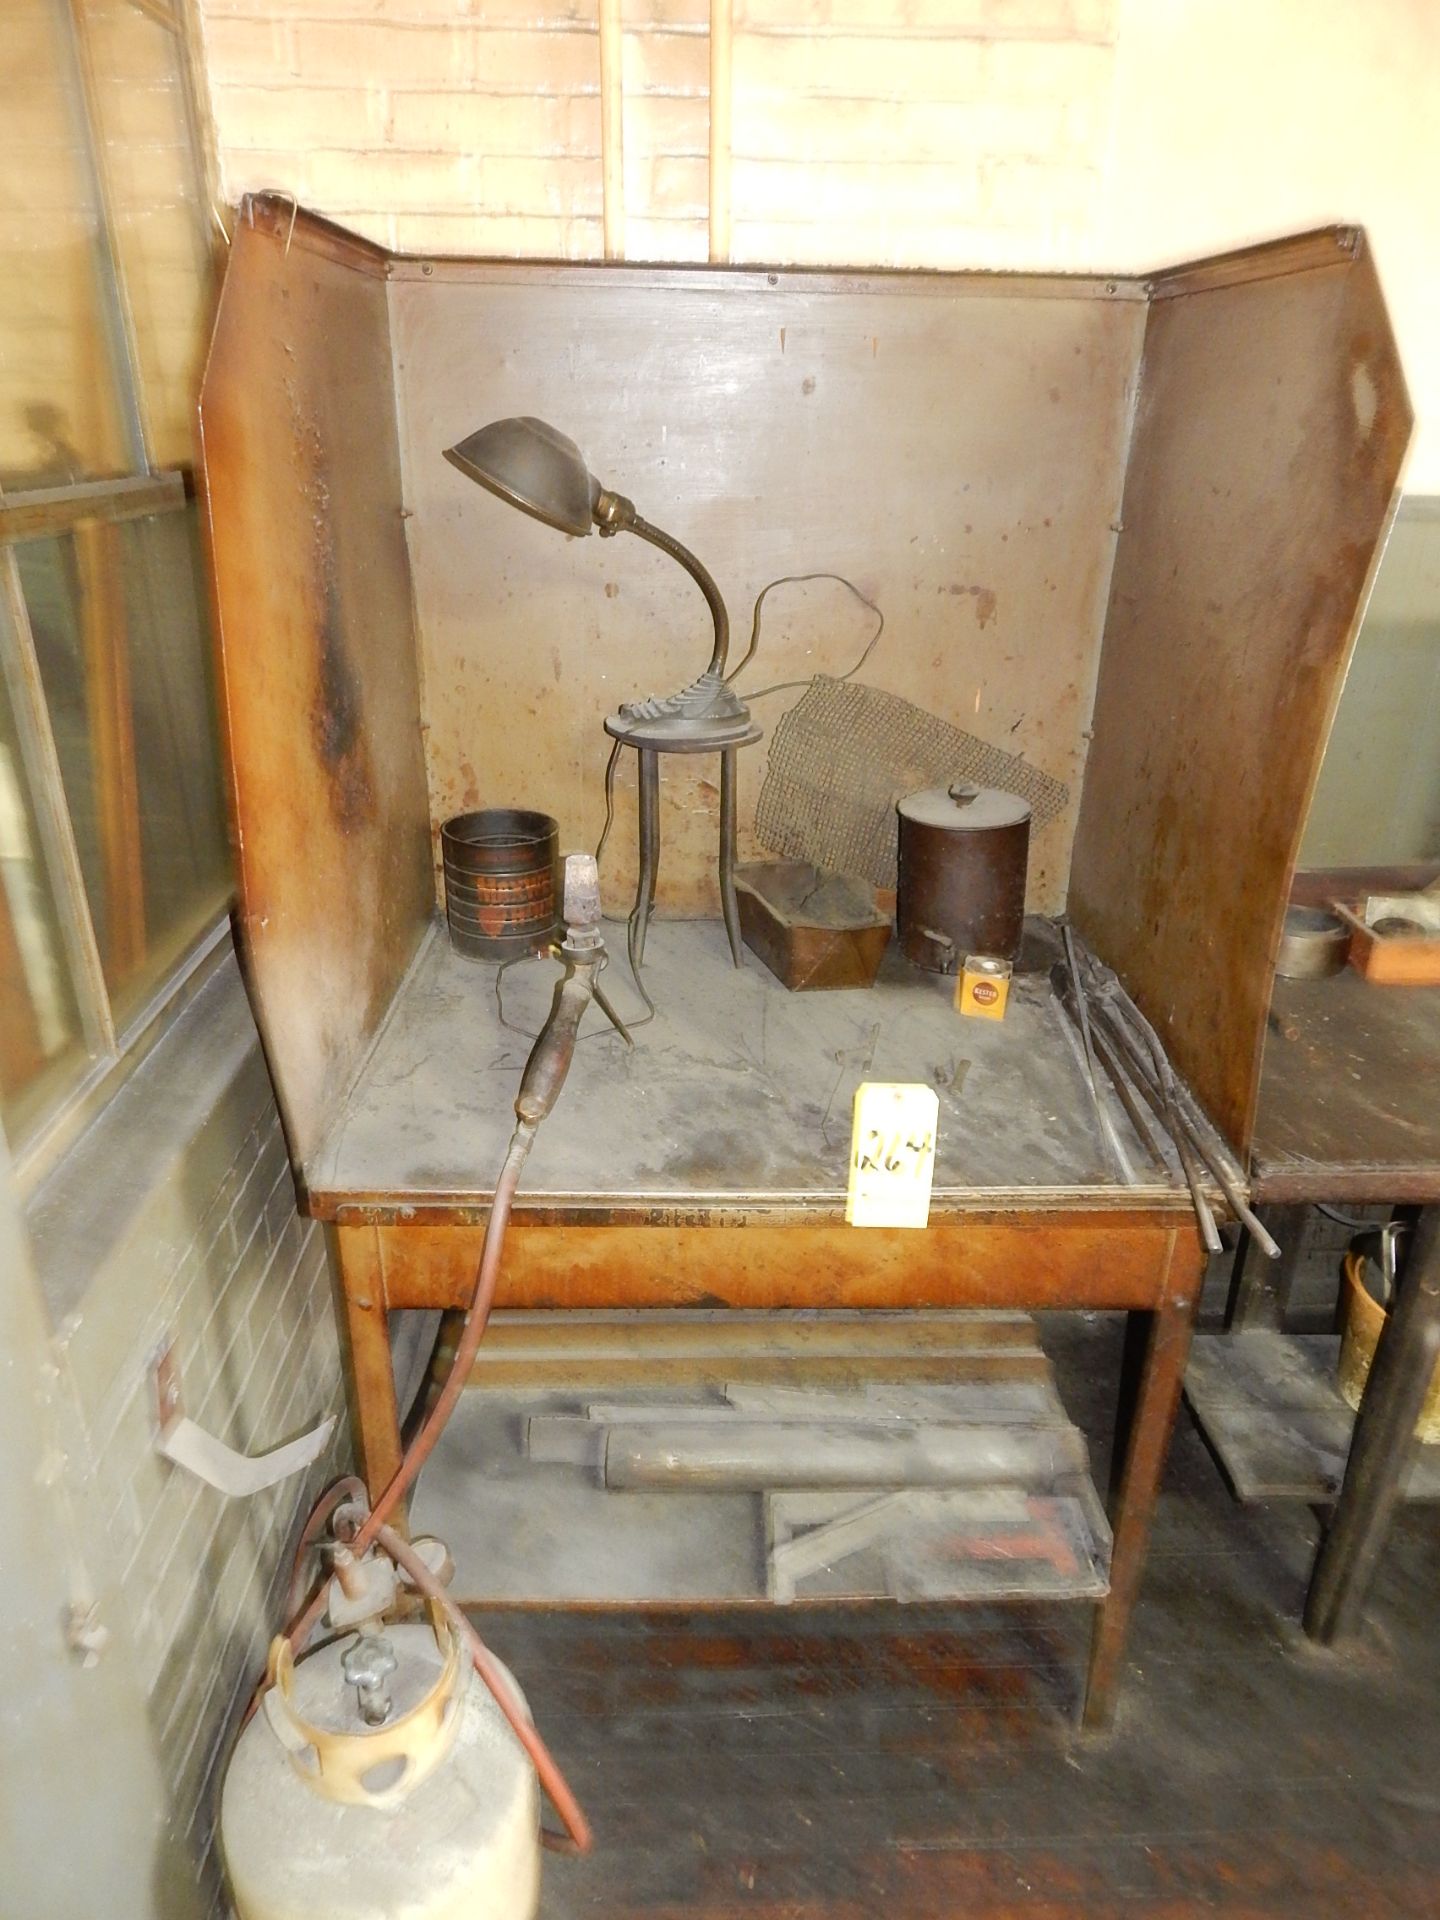 Work Bench with Torch